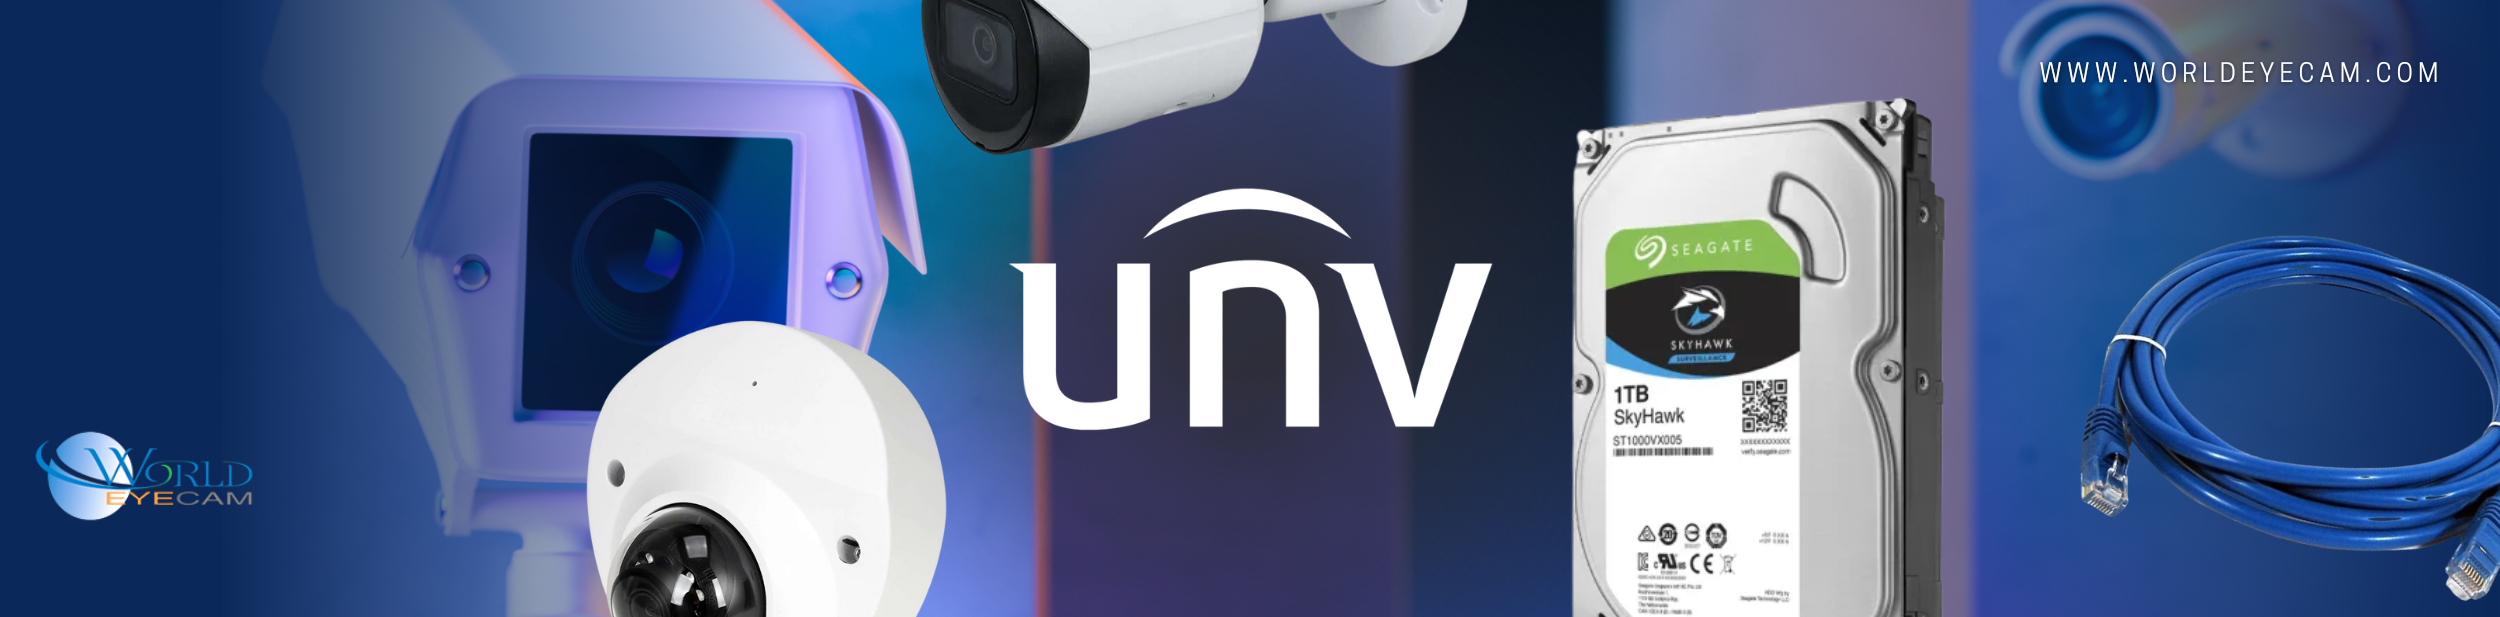 Uniview IP Camera Systems